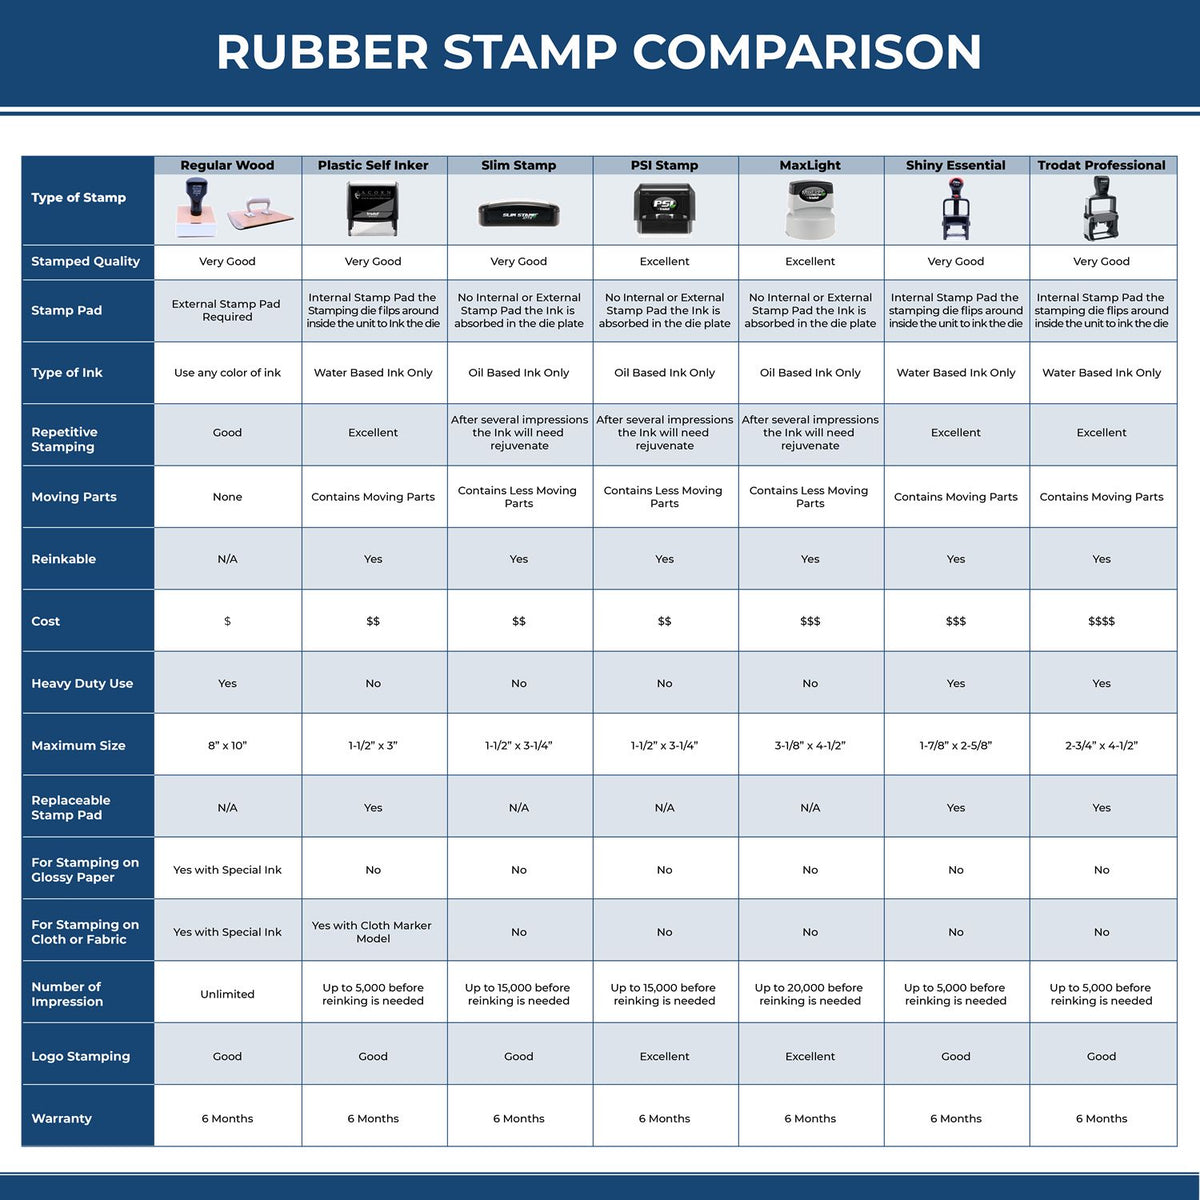 Large Self-Inking Restricted Delivery Stamp 4969S Rubber Stamp Comparison